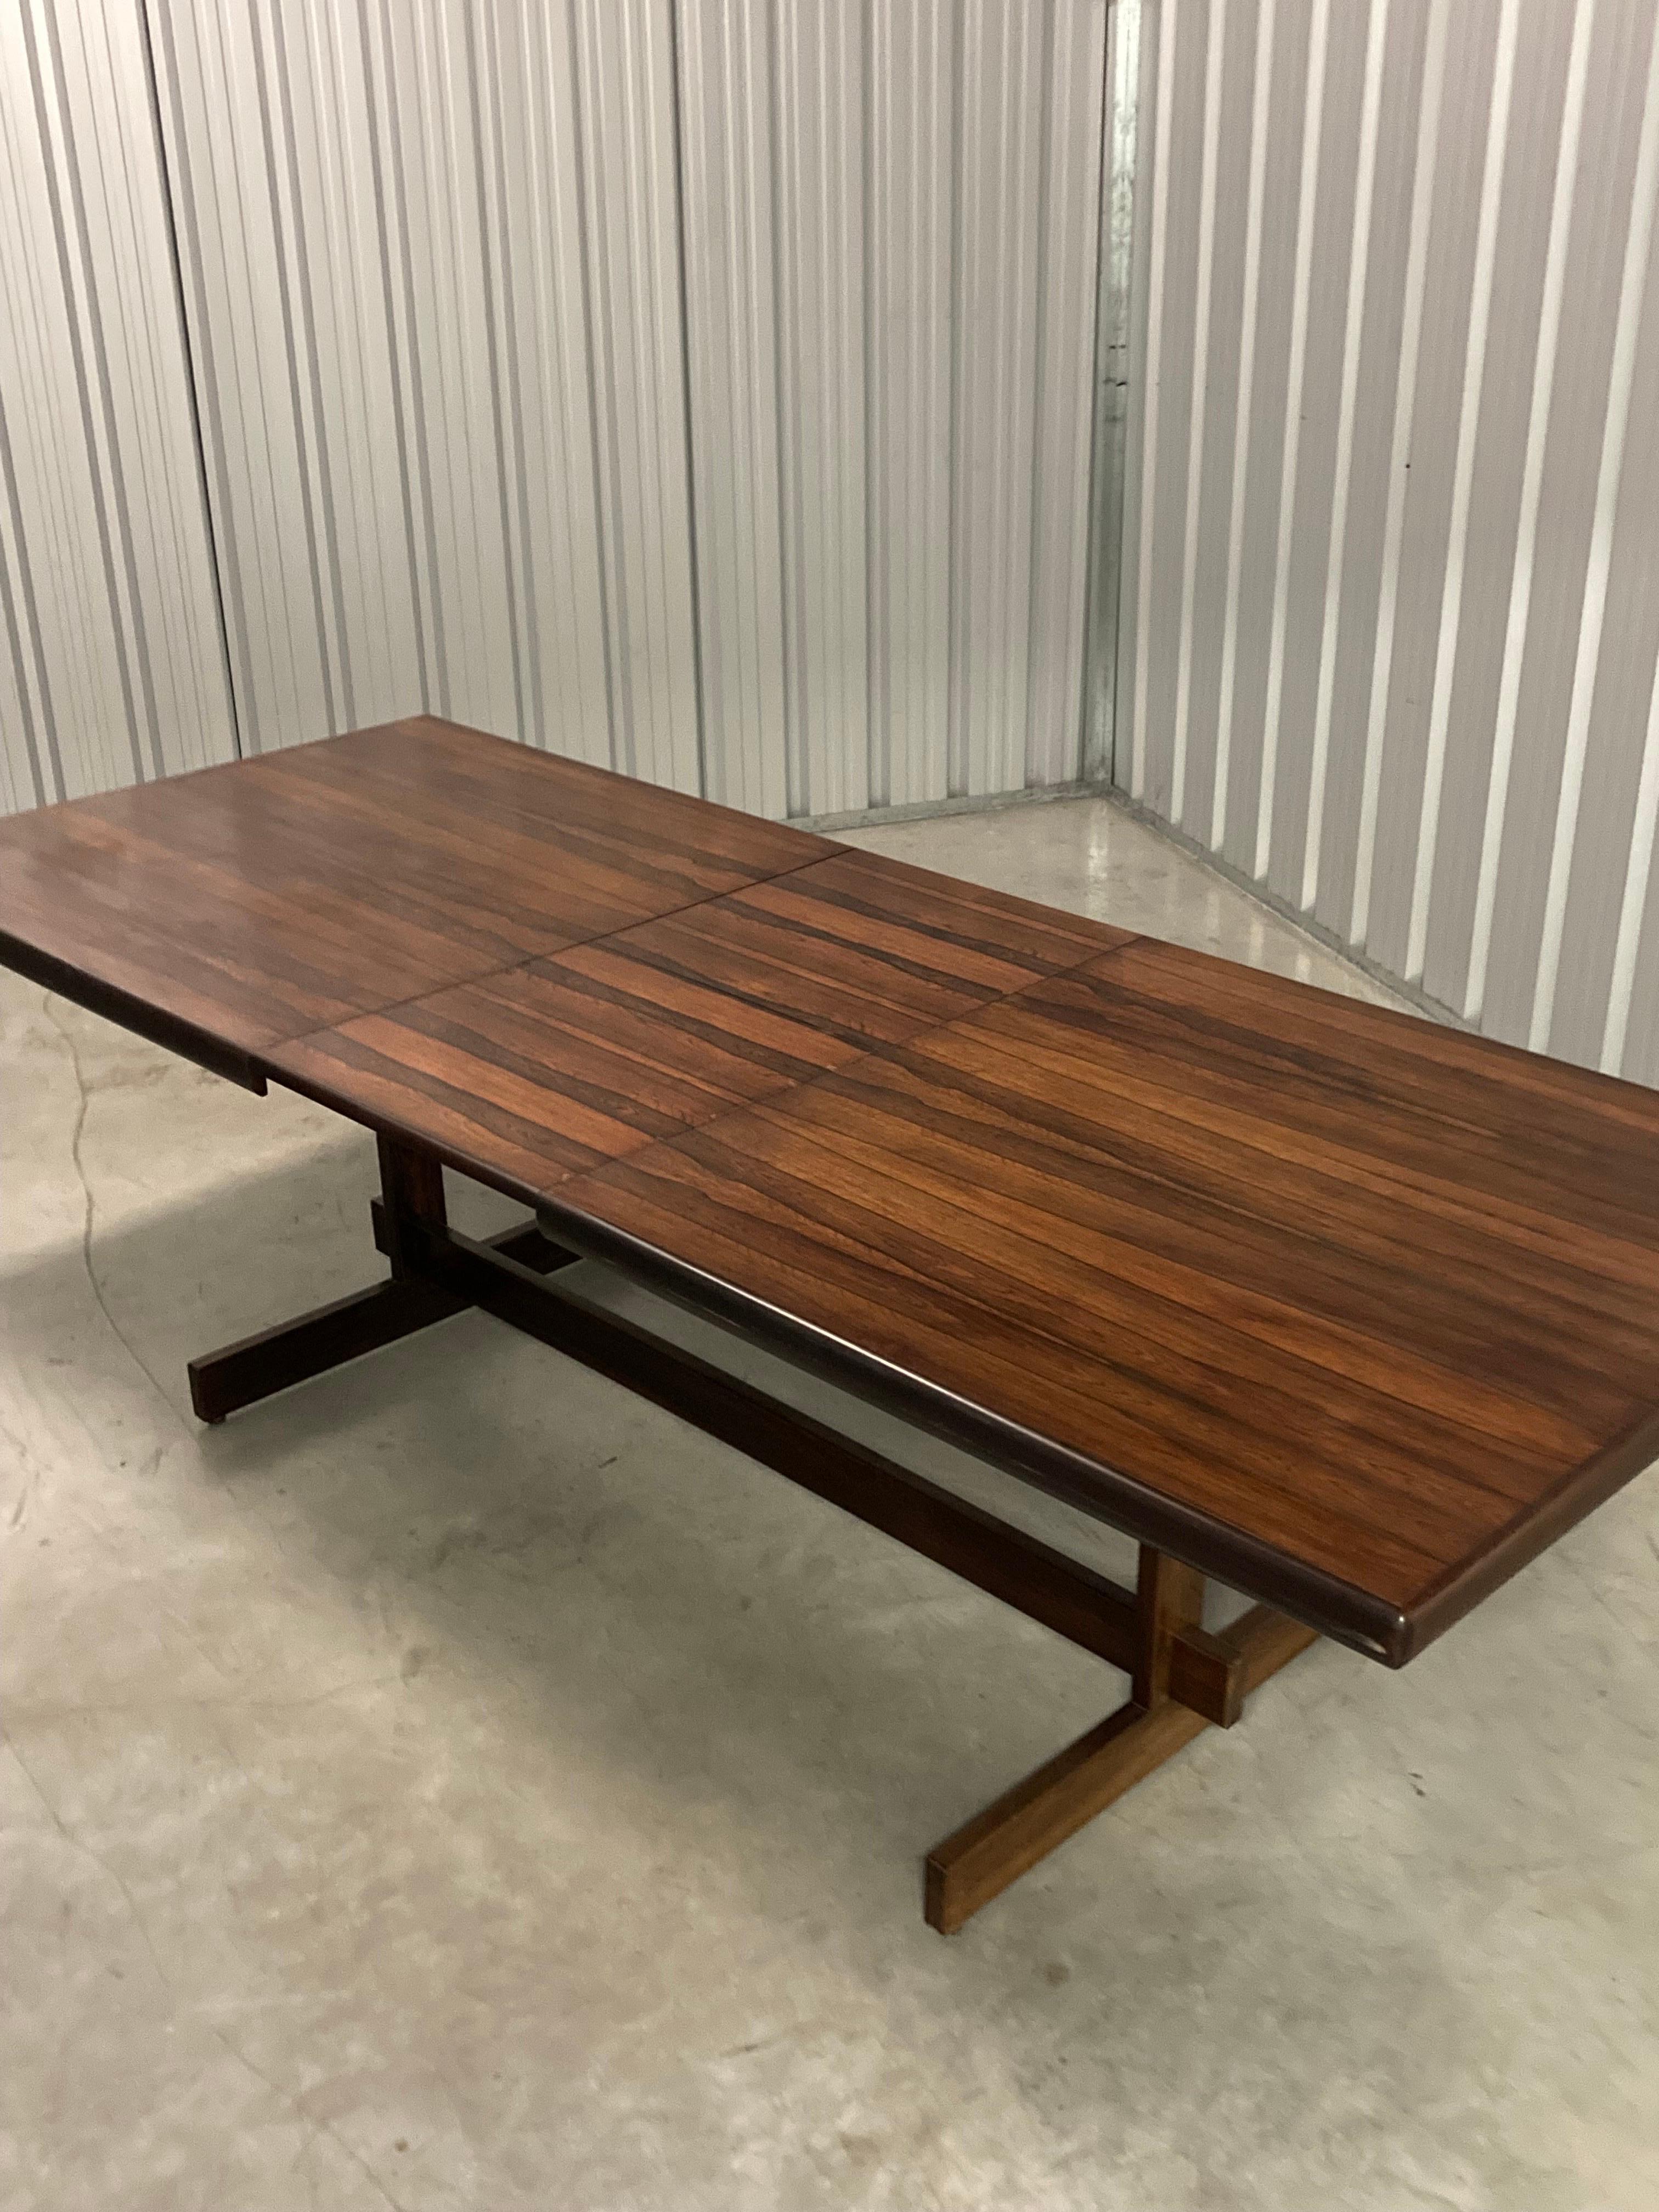 1950s Brazilian Design Extending Dining Table by Celina Decorações

Fold our extension leaf contained within the structure of the table, underneath the table top, which adds 50 cm, making the table 249 cm long. 


Celina Decorações
Rio de Janeiro